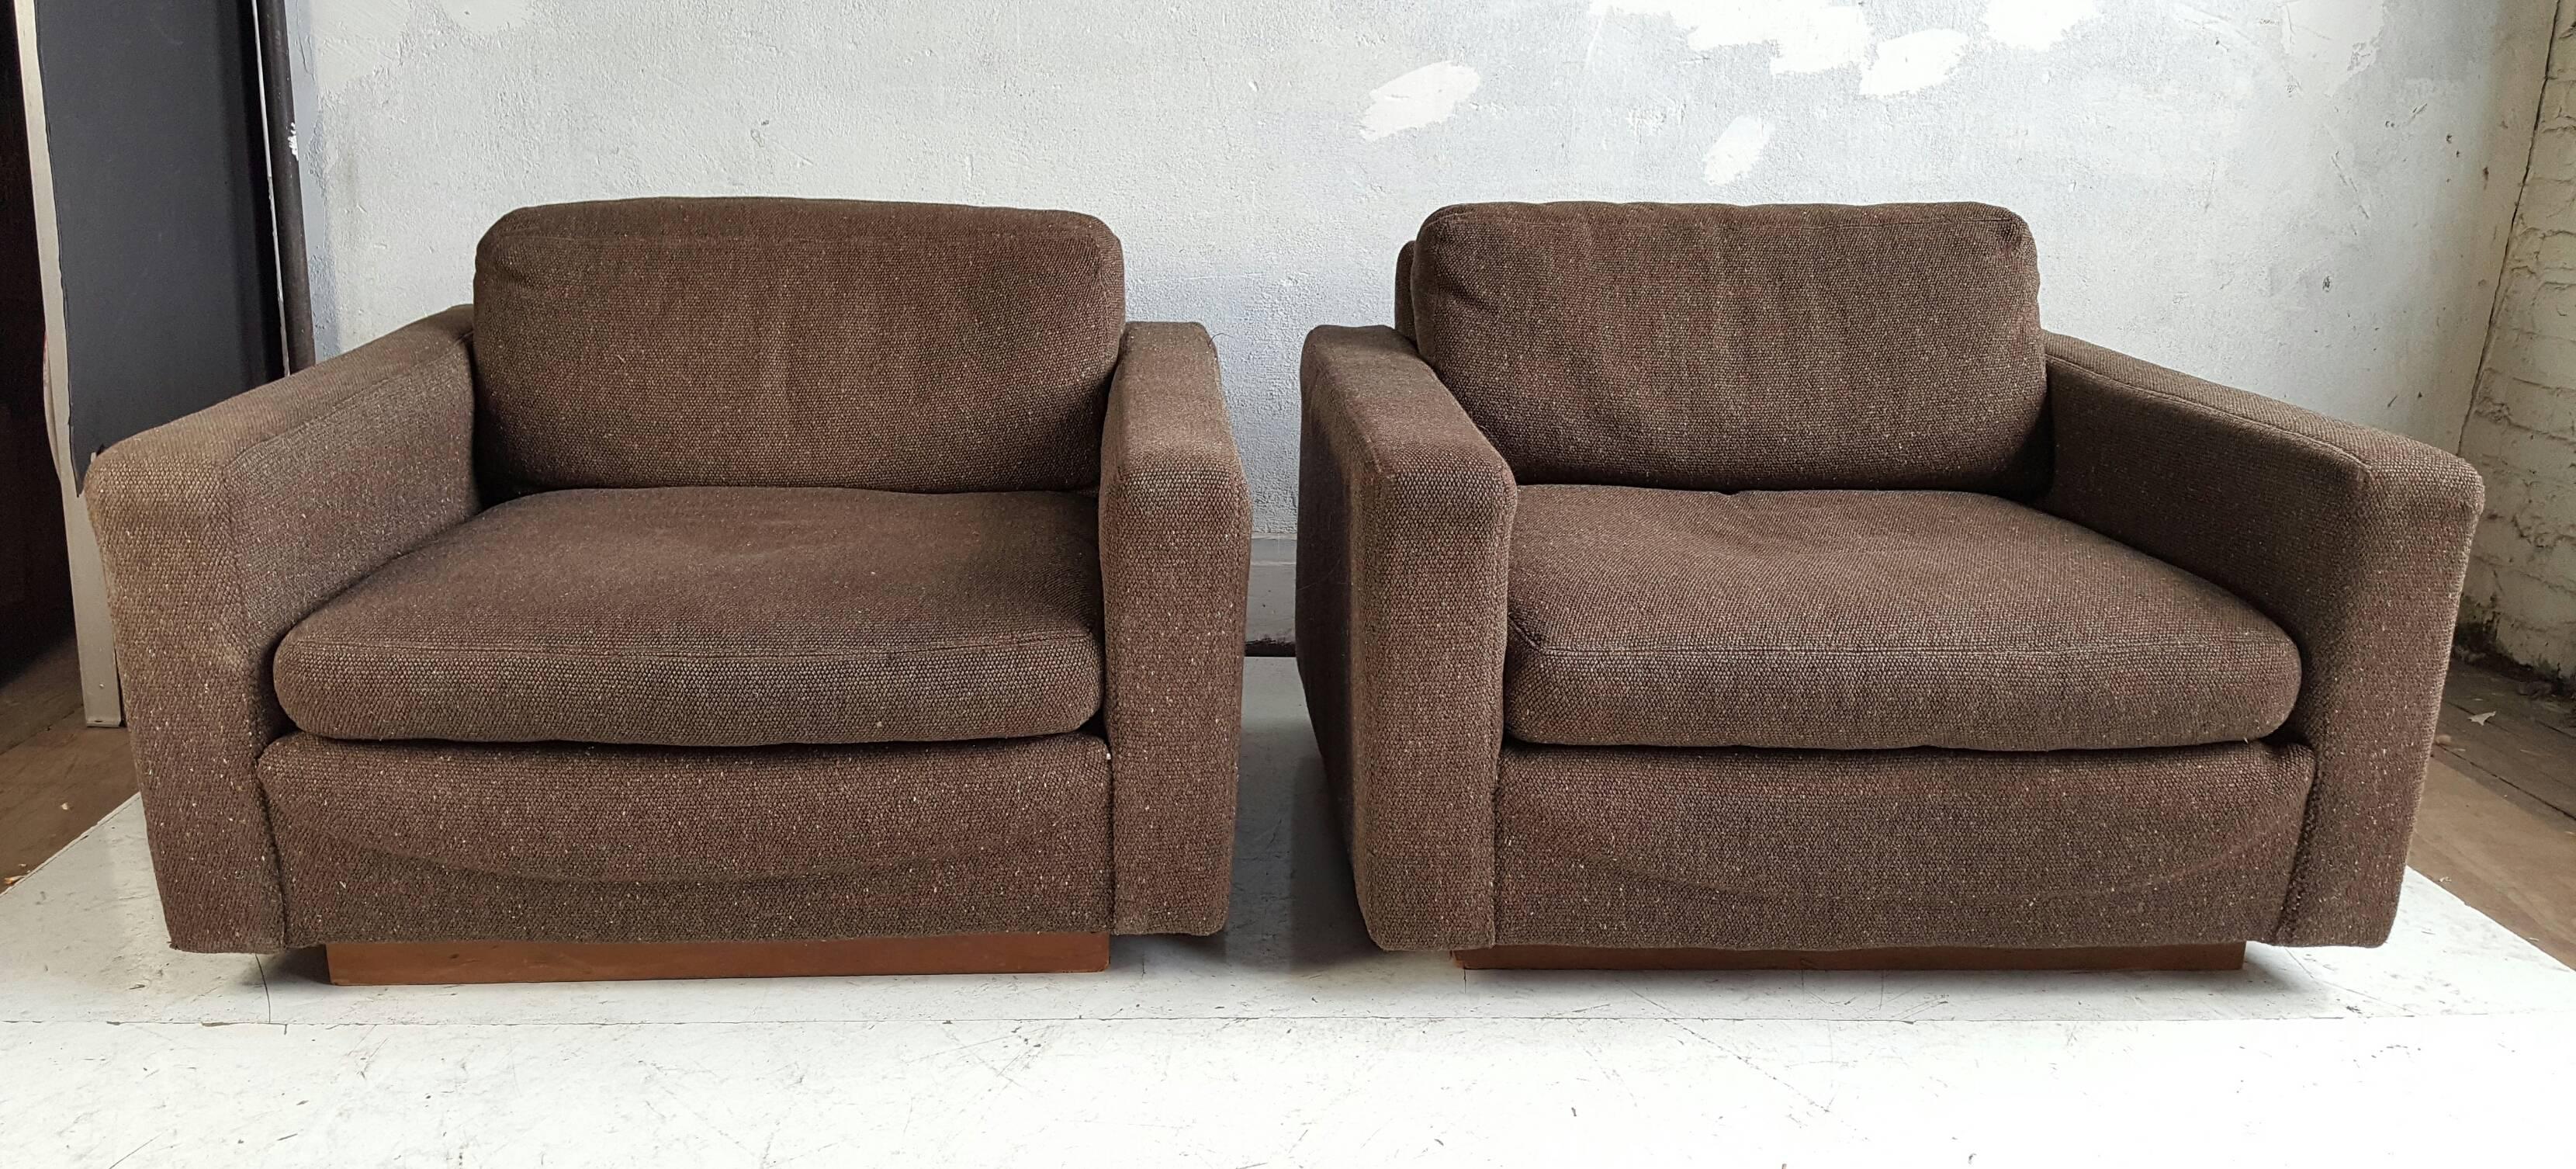 Classic pair of Mid-Century Modernist cube chairs designed by Milo Baughman for Thayer Coggin. Retain original brown wool fabric,. Walnut veneer bases. Extremely comfortable chairs...Usable, but would be fabulous restored.